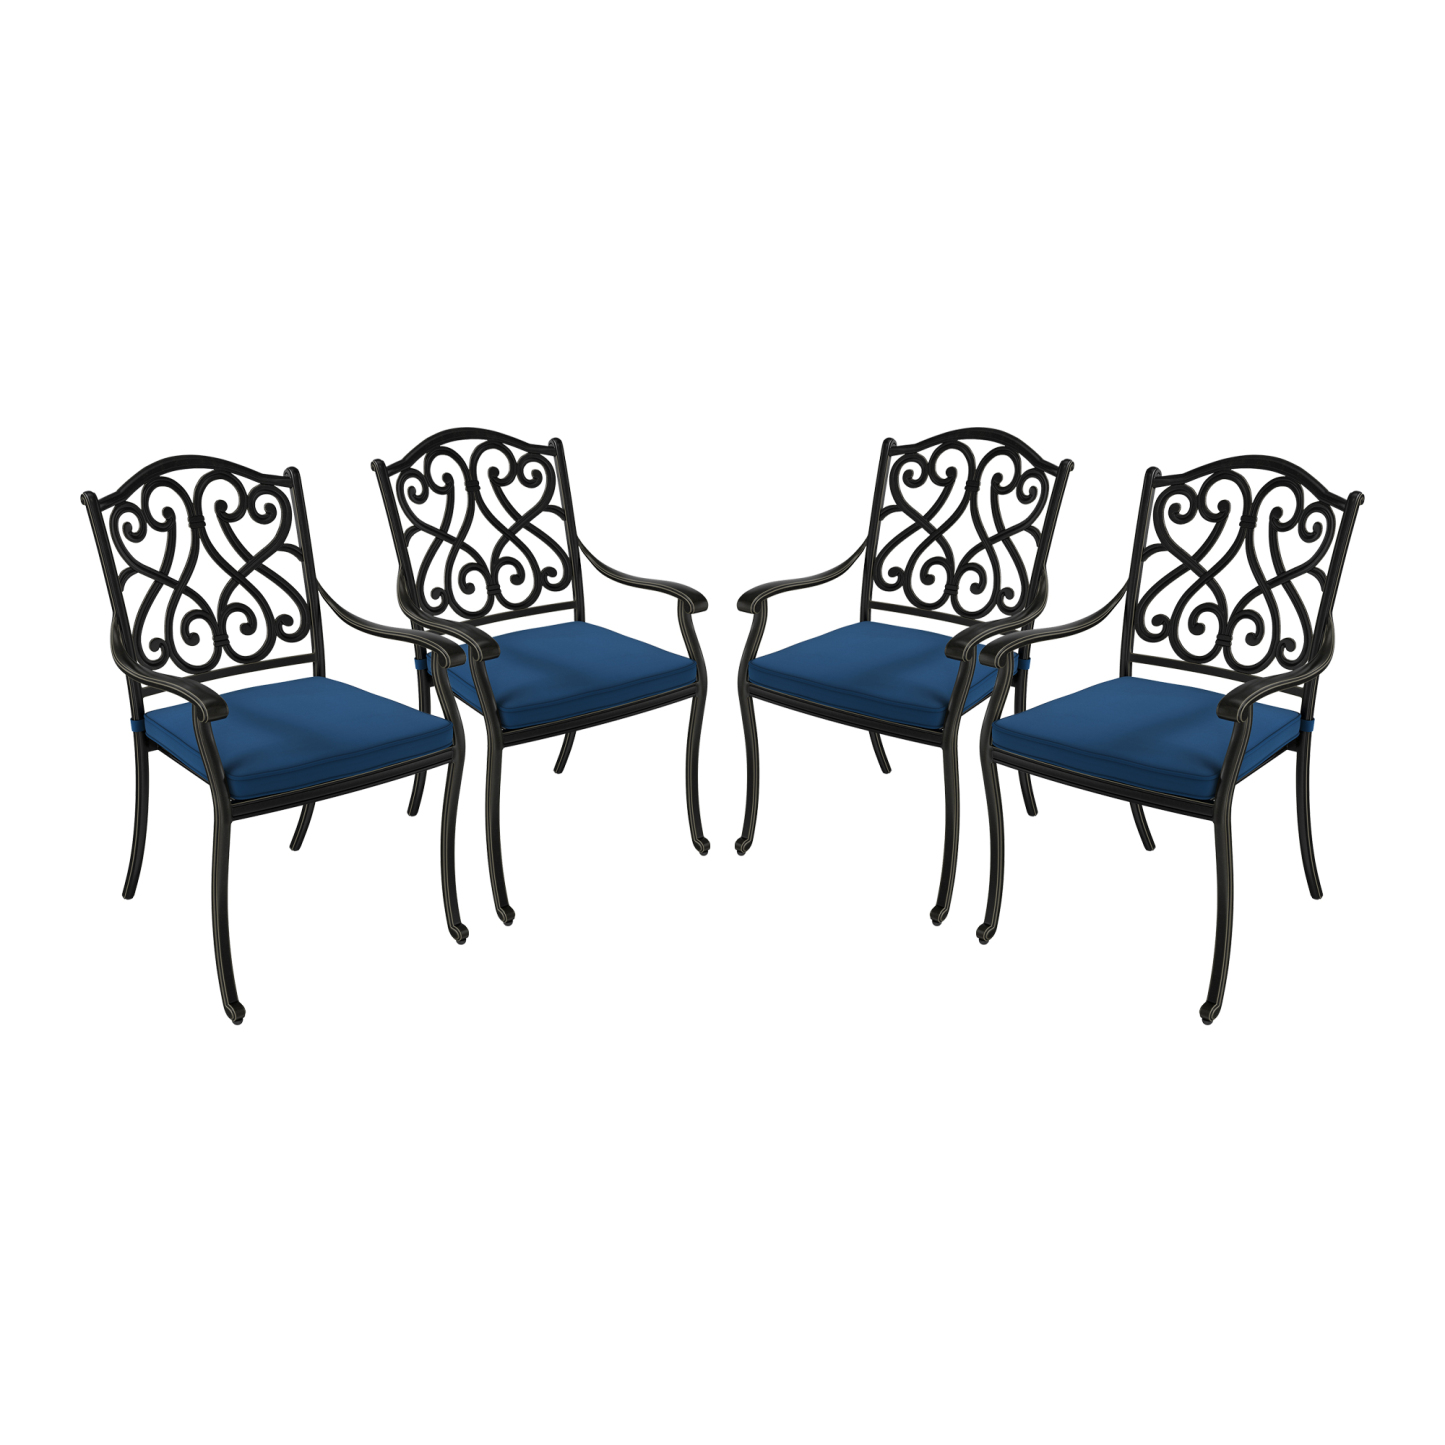 Set of 4 Cast Aluminum Outdoor Dining Chairs with Cushion